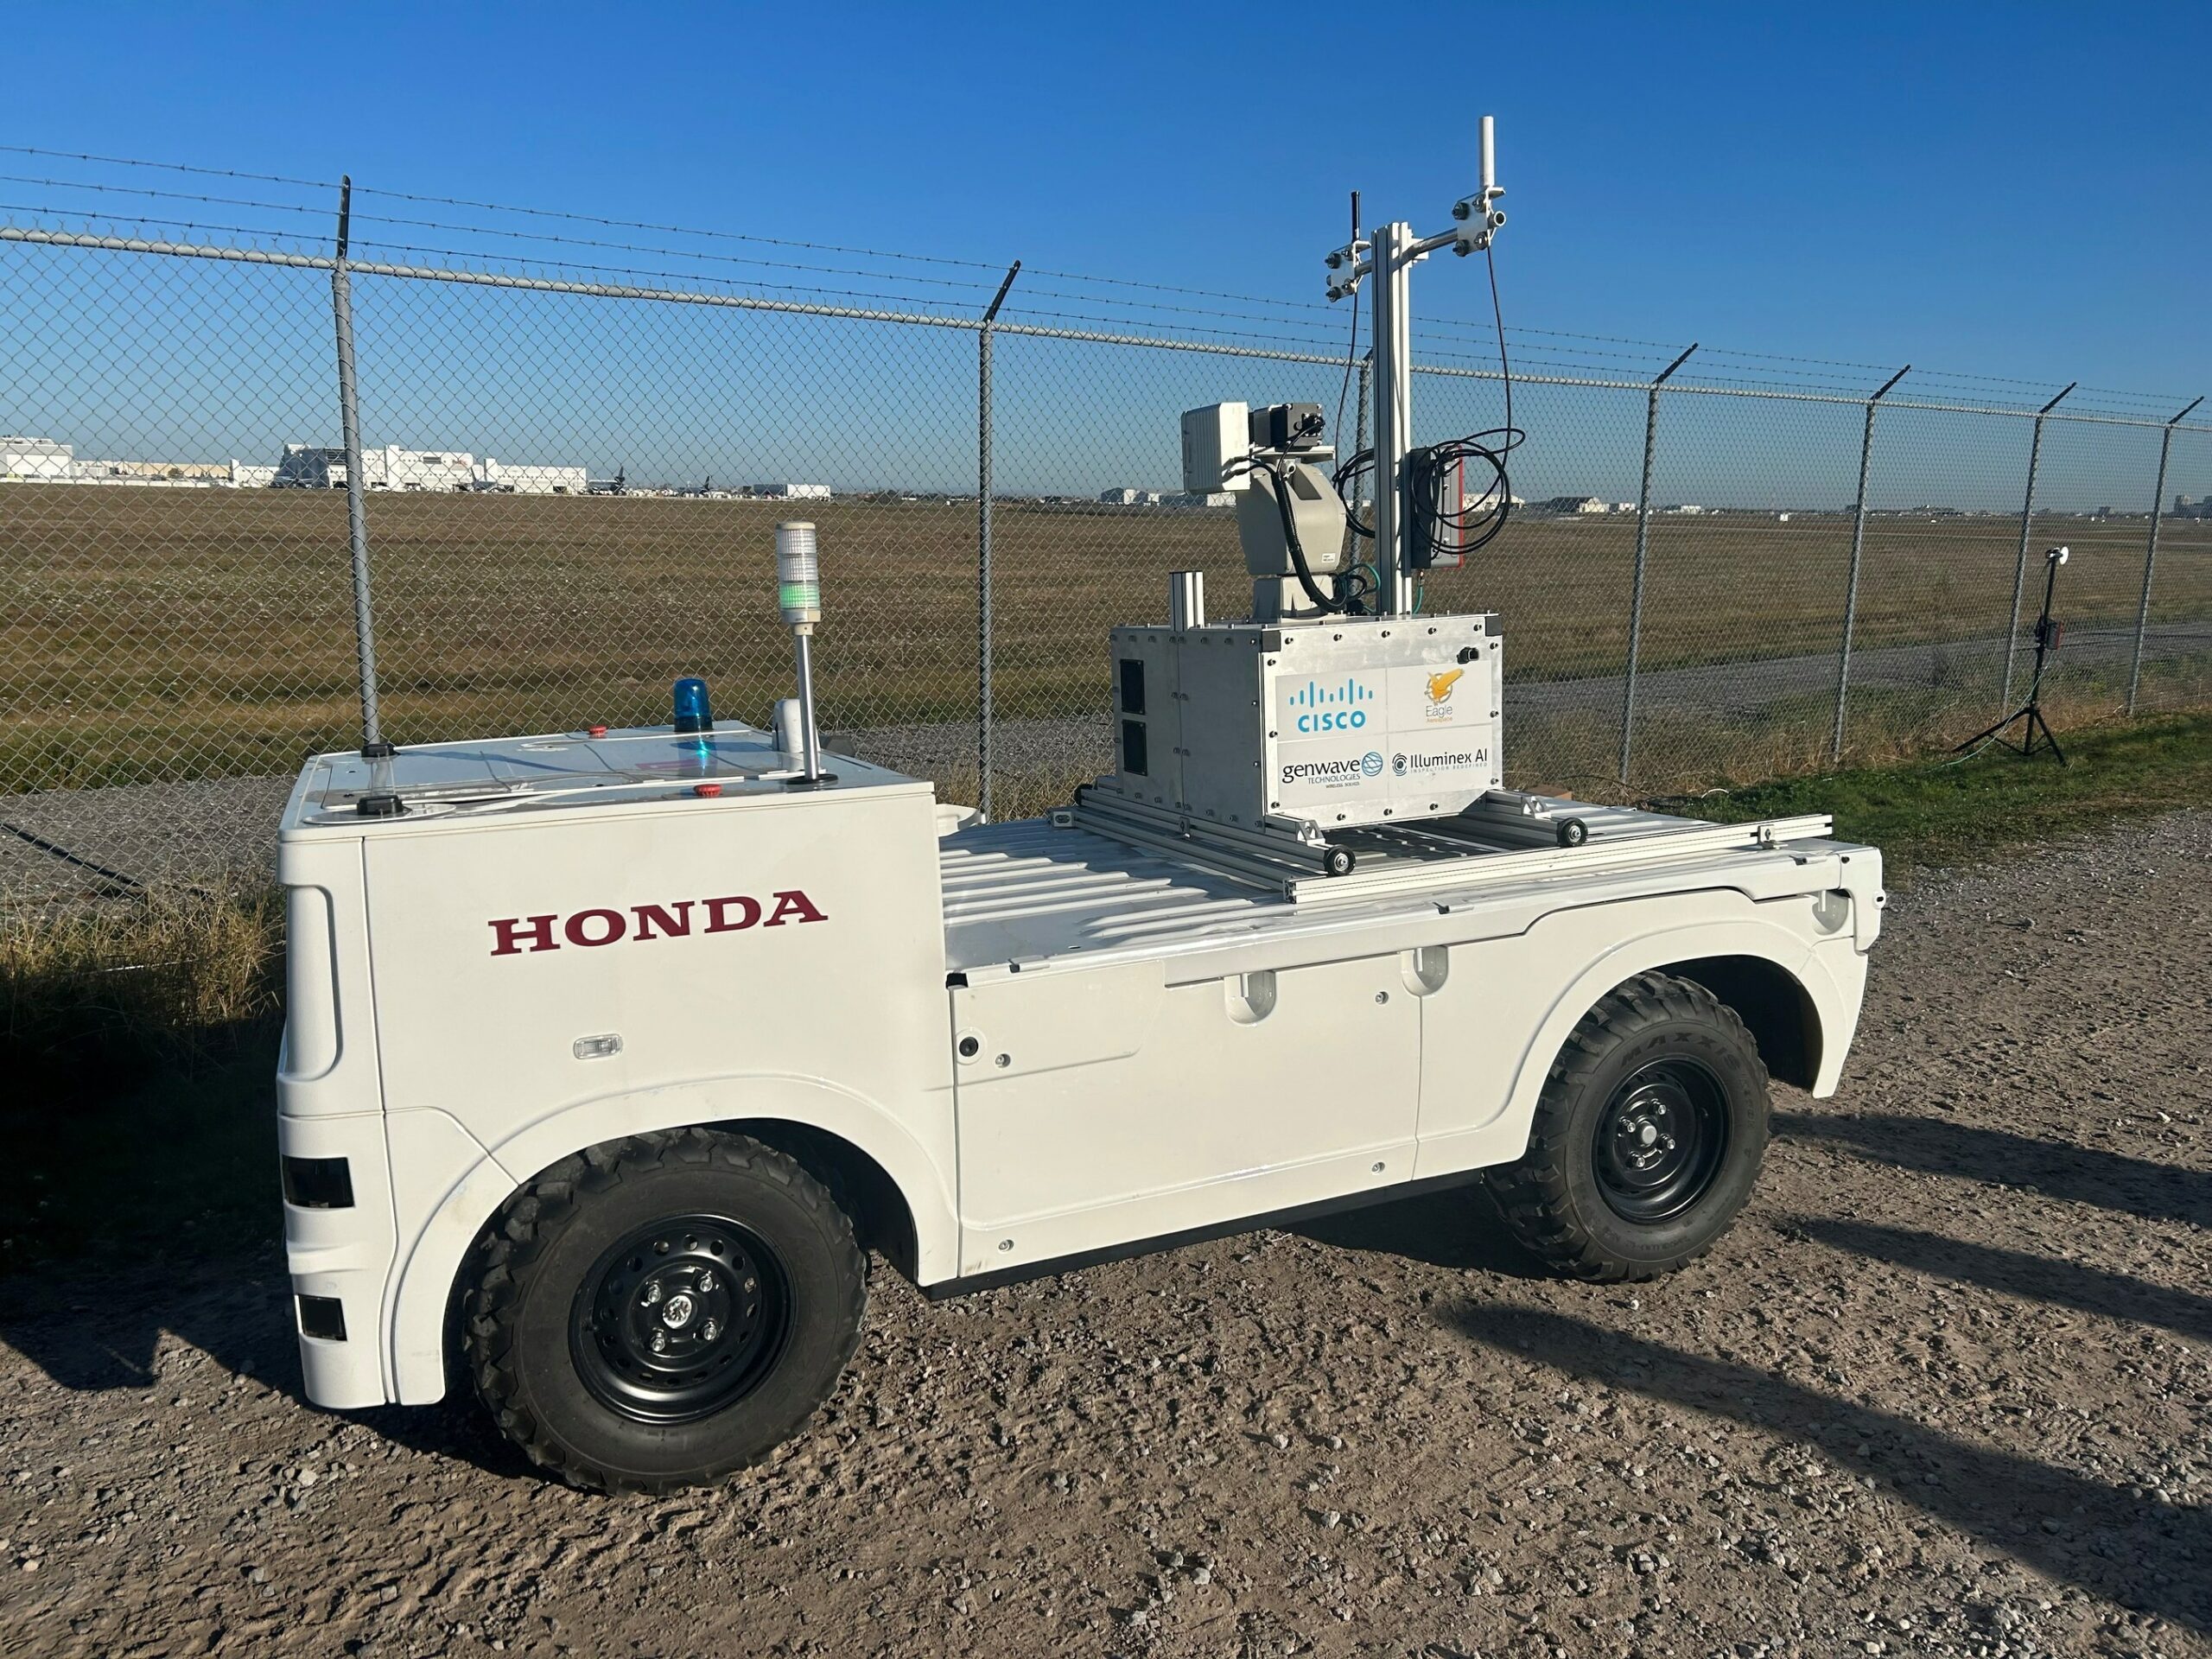 First-of-its-kind autonomous airfield inspection vehicle showcased by Greater Toronto Airports Authority on Tuesday 17 October